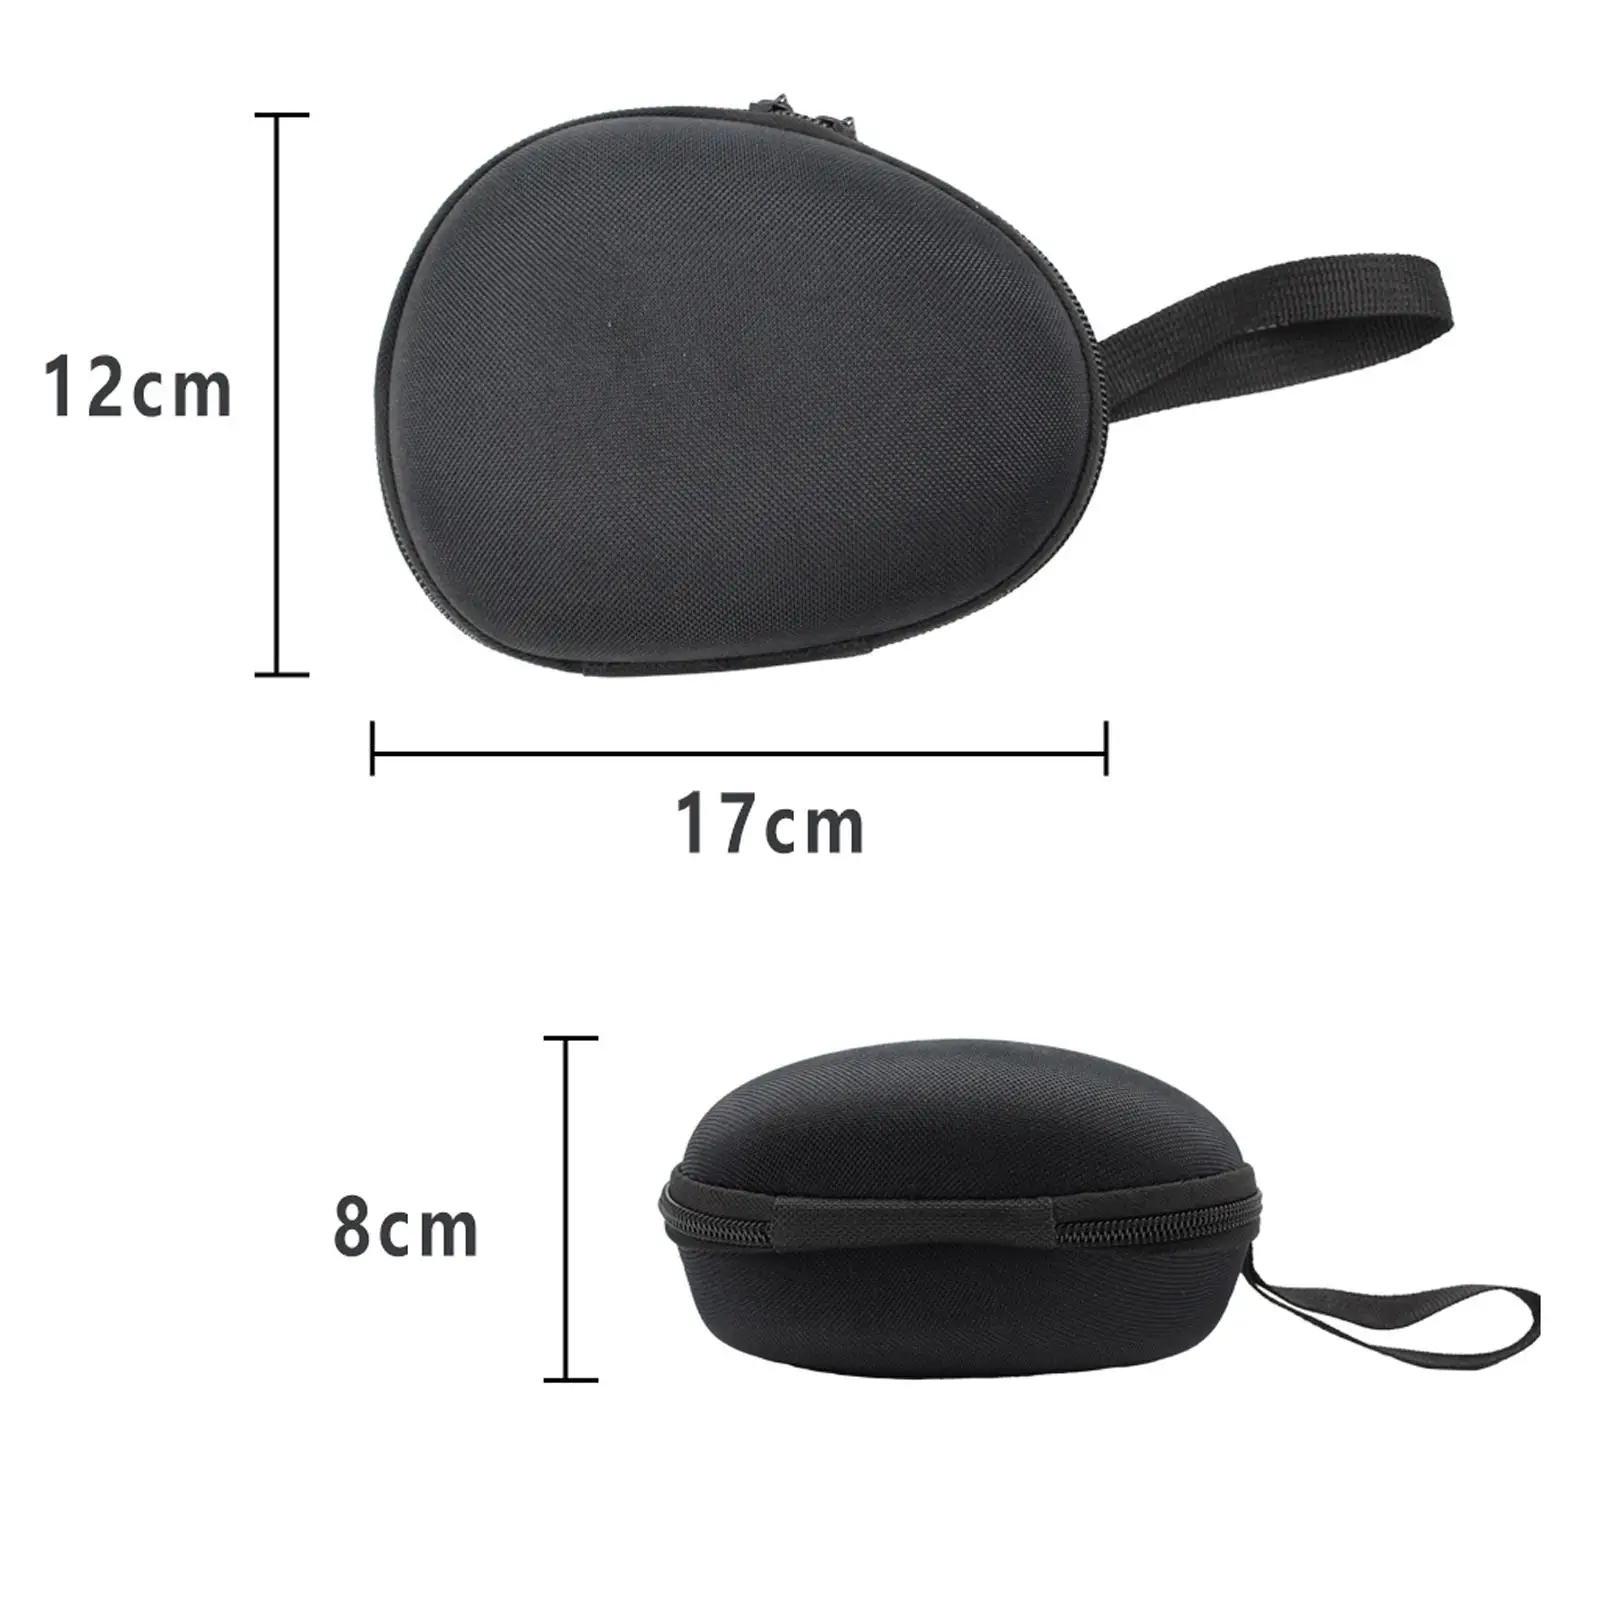 Portable Fishing Reel Bag Protective Case Cover Black Fishing Gear Organizer Protector Fishing Pouch Bag for Raft Reel Tool